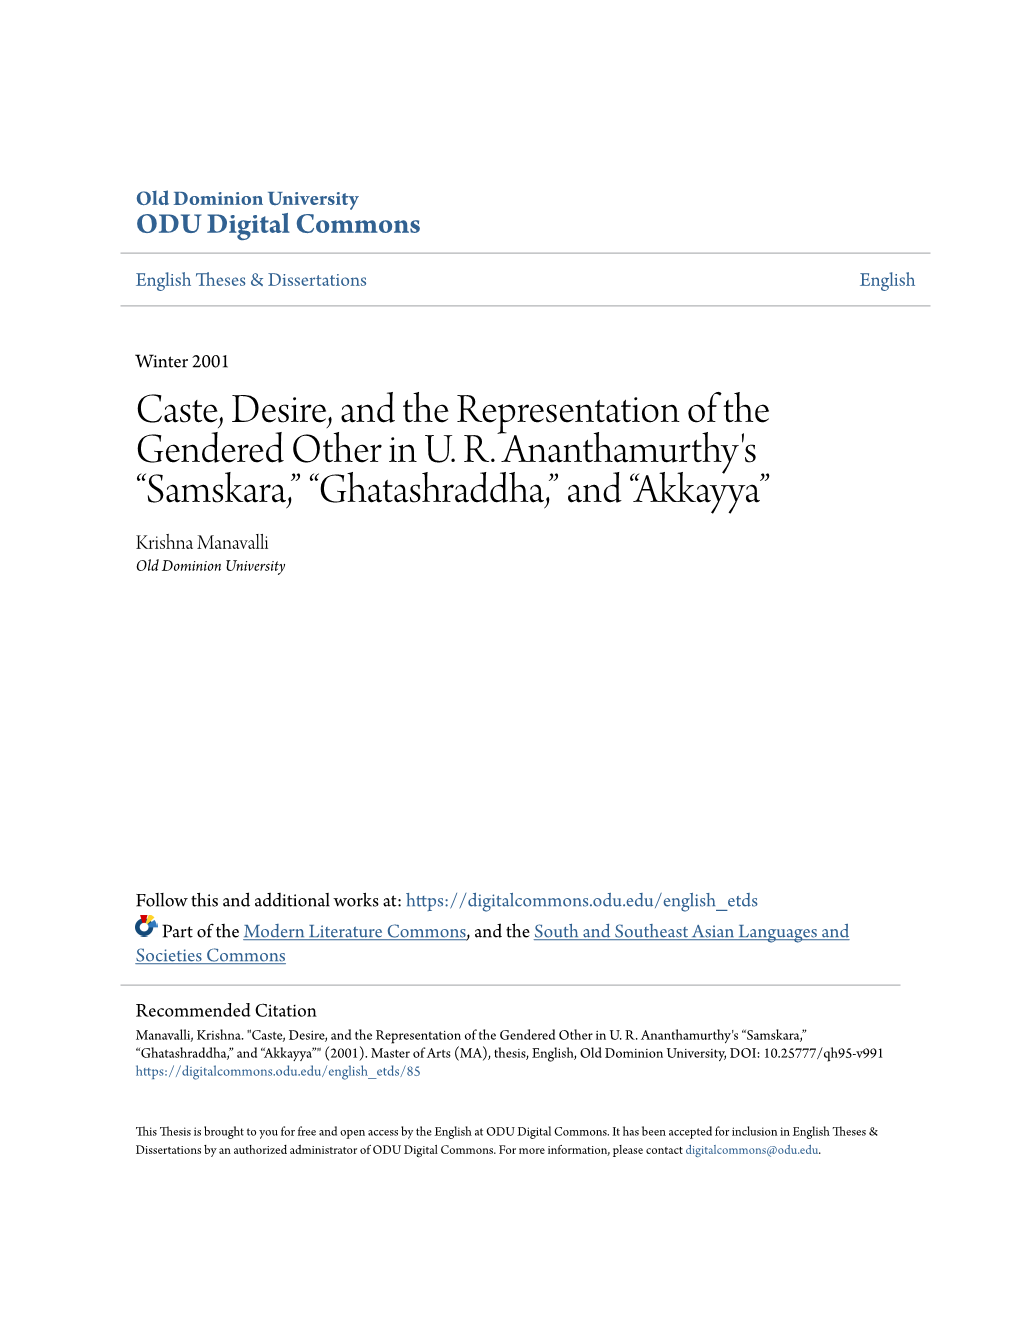 Caste, Desire, and the Representation of the Gendered Other in U. R